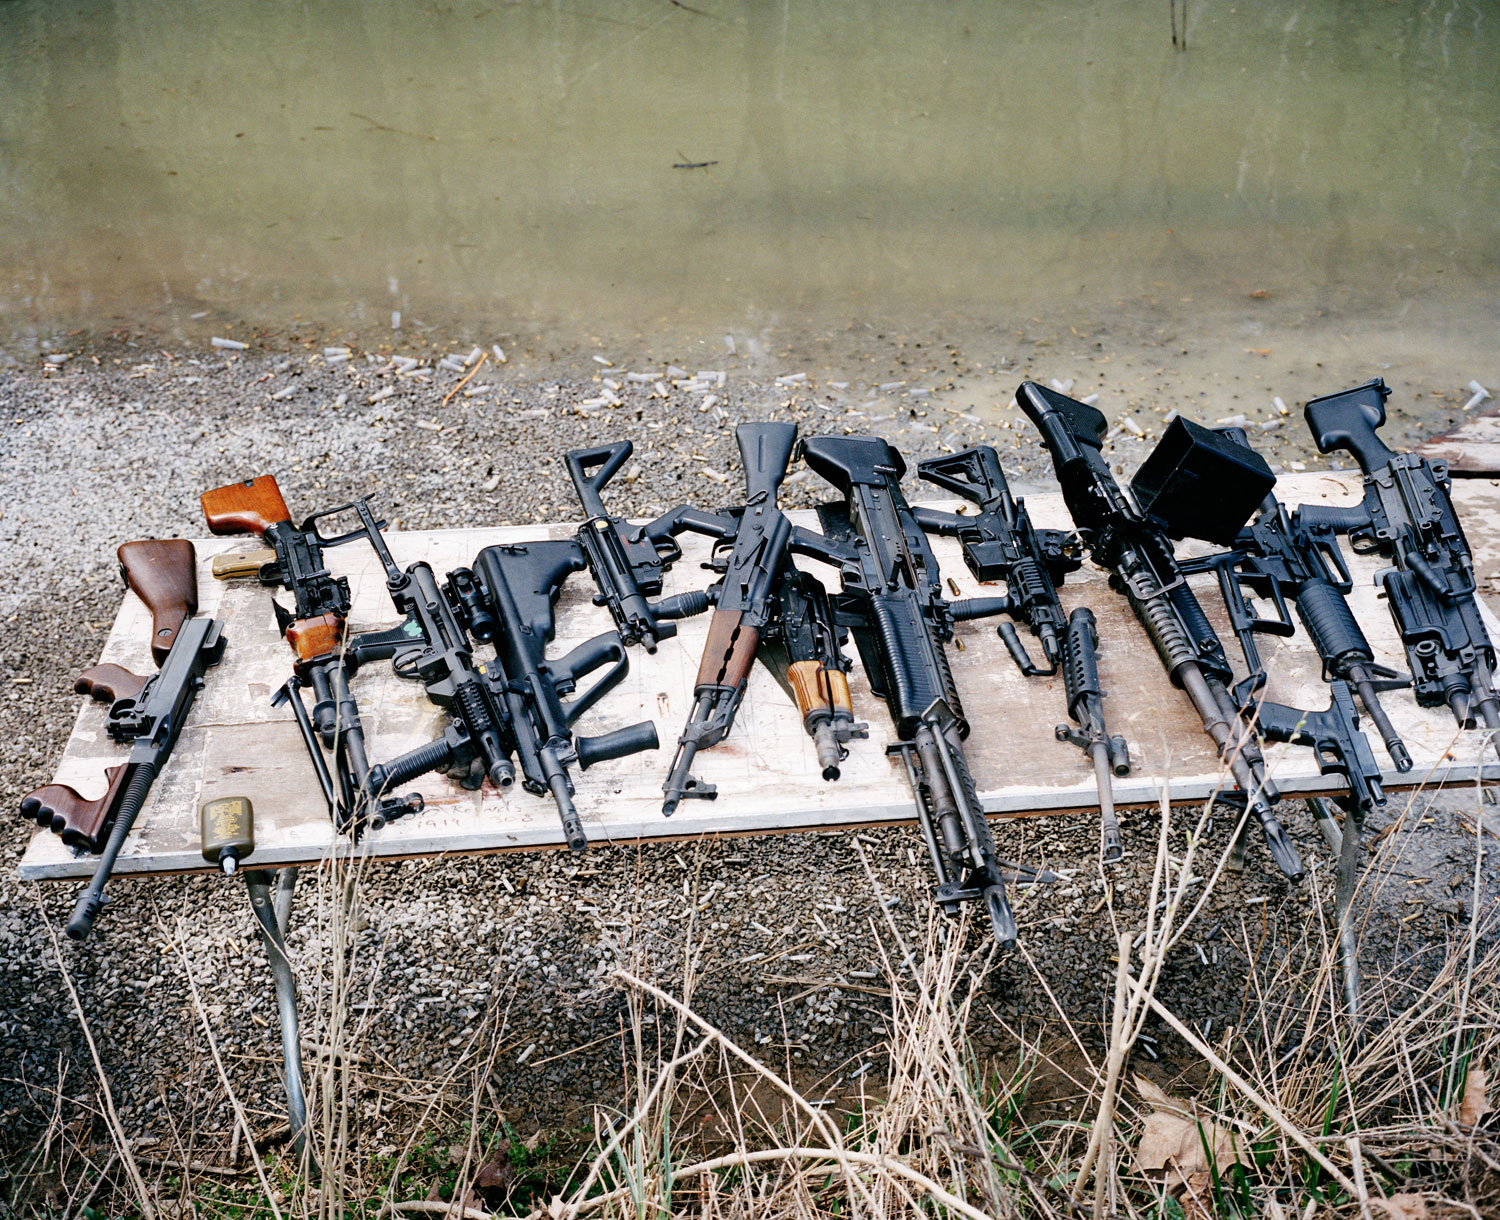 Rental weapons are lined up, ready to use.